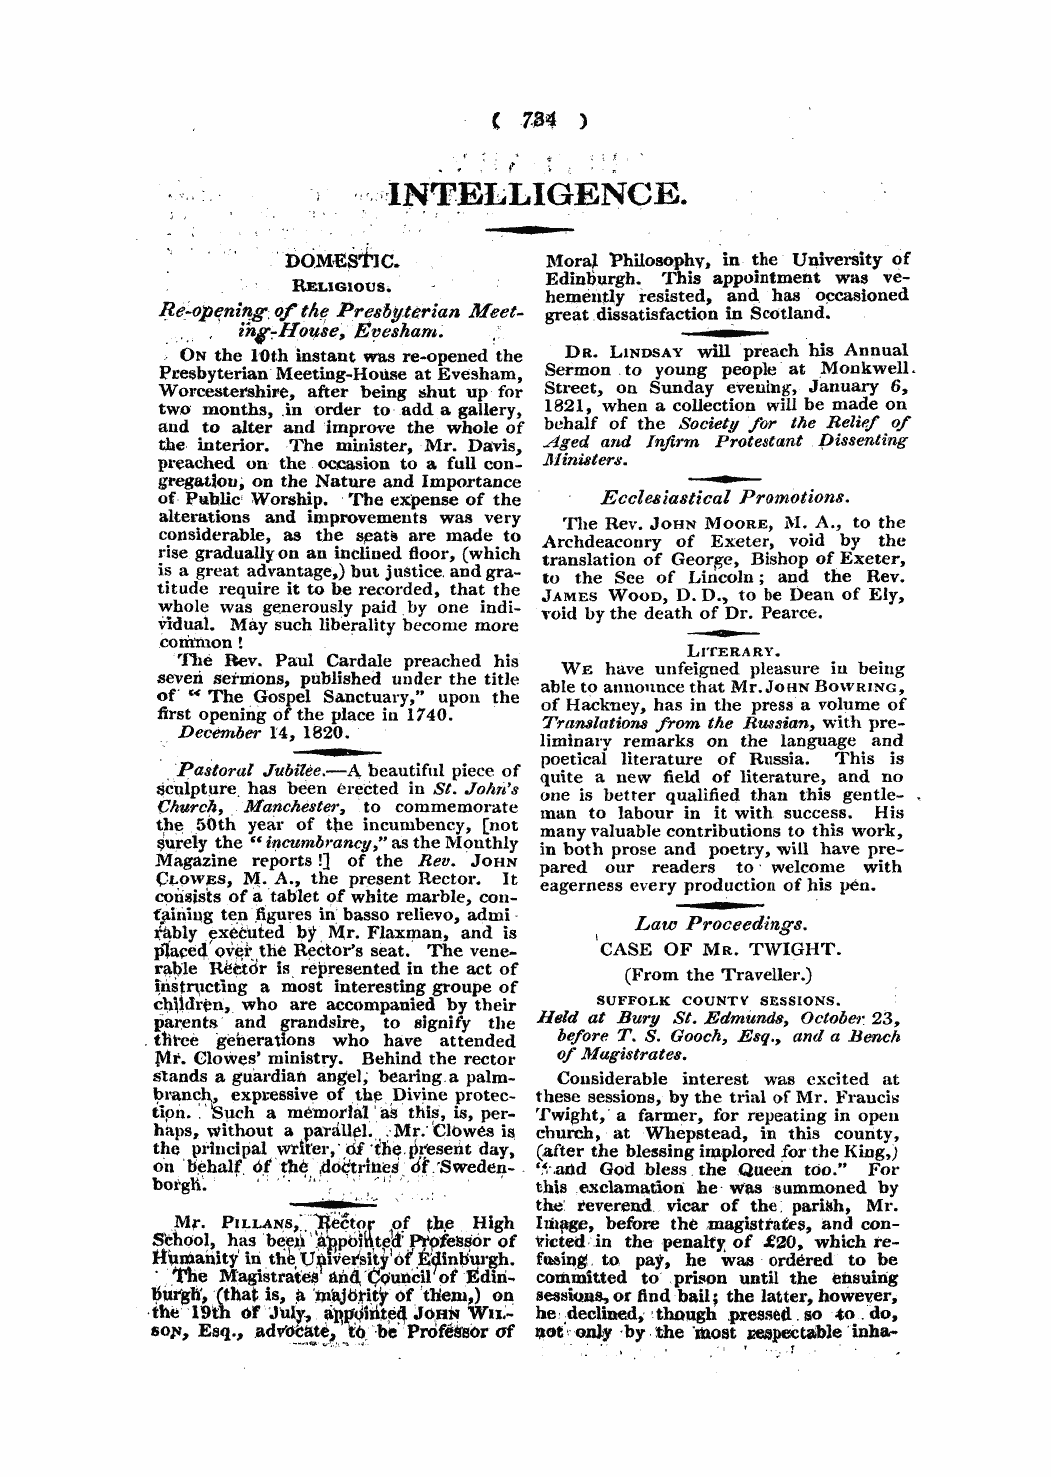 Monthly Repository (1806-1838) and Unitarian Chronicle (1832-1833): F Y, 1st edition - Intelligence.